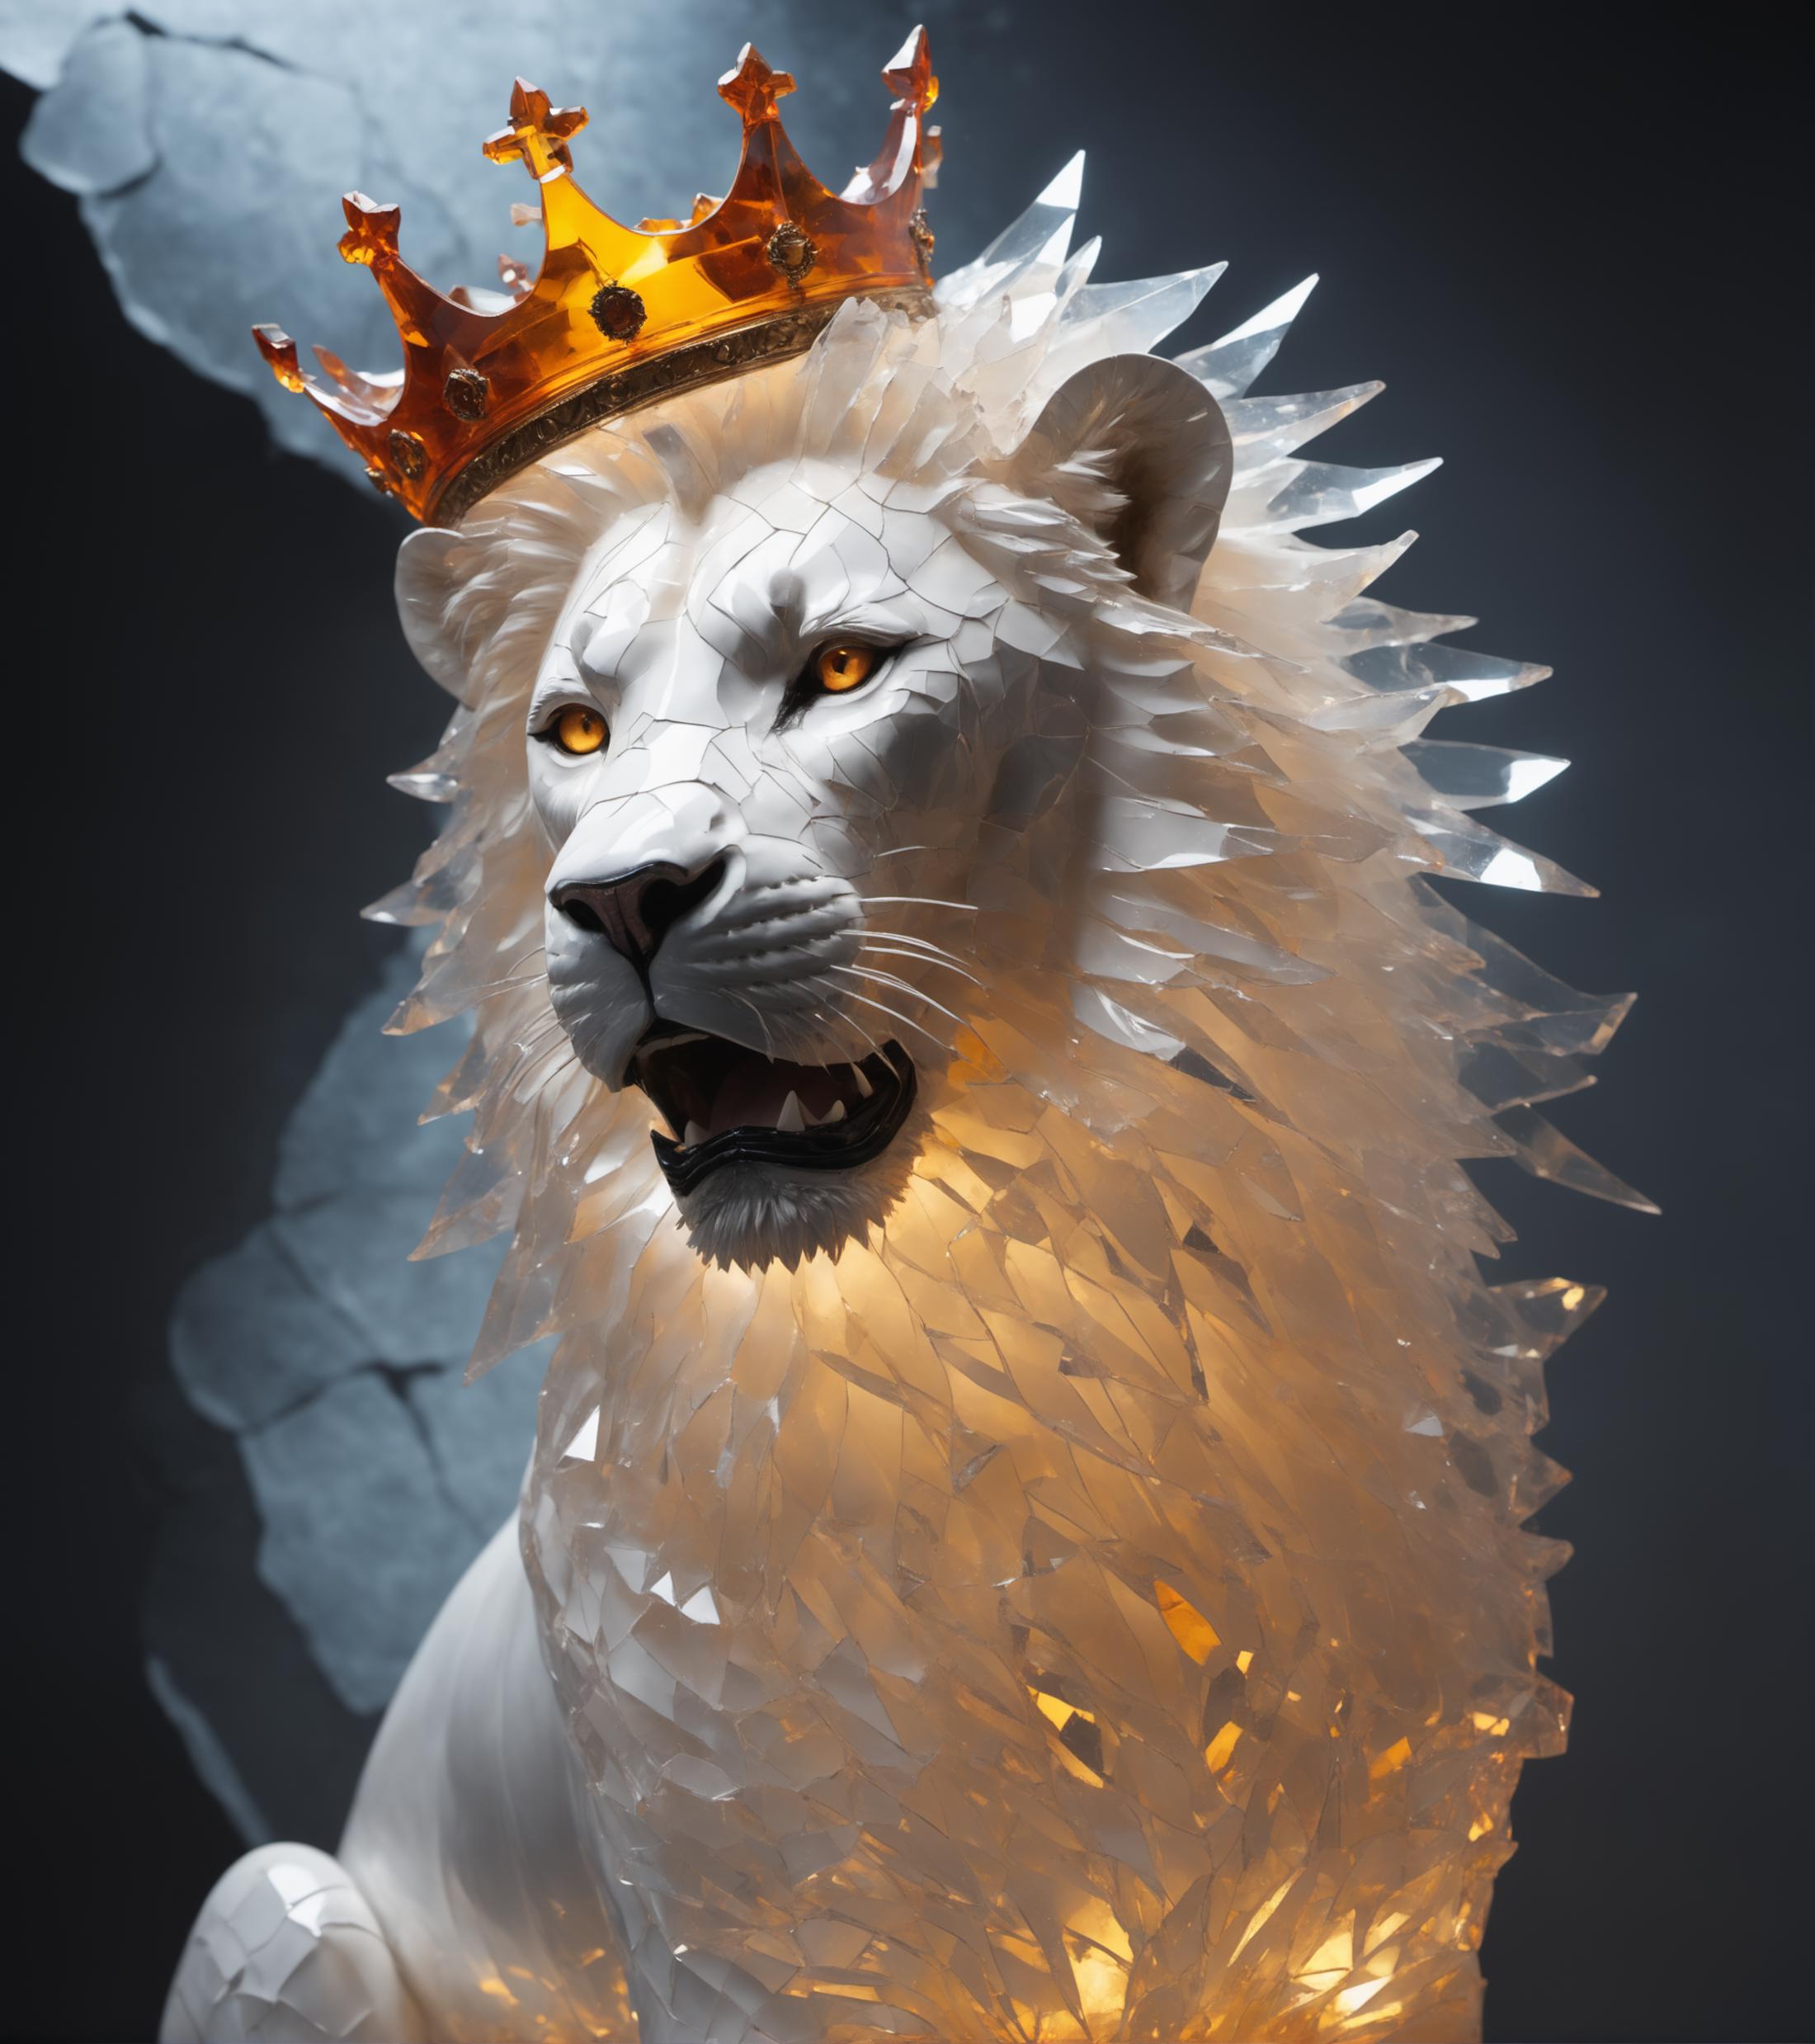 A life-size sculpture of a lion with a crown on its head.